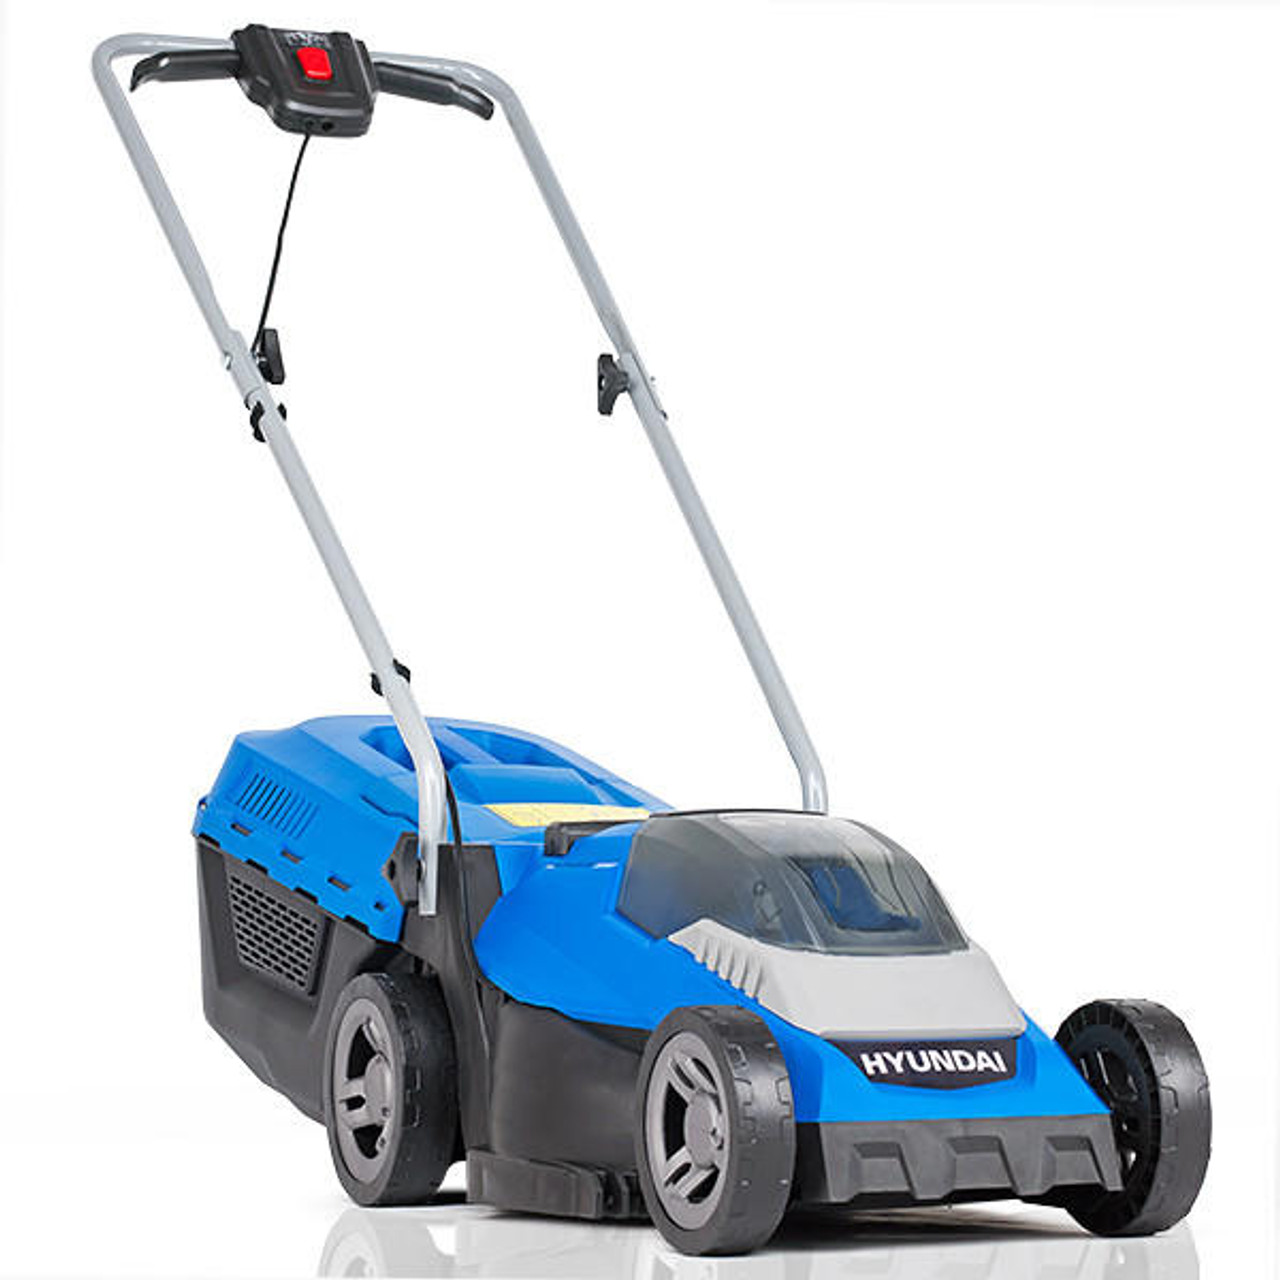 https://cdn11.bigcommerce.com/s-bqsvlgtsd2/images/stencil/1280x1280/products/445/19283/hyundai-40v-lithium-ion-cordless-battery-powered-roller-lawn-mower-33cm-cutting-width-with-battery-and-charger-or-hym40li330p__01794.1682435353.jpg?c=1